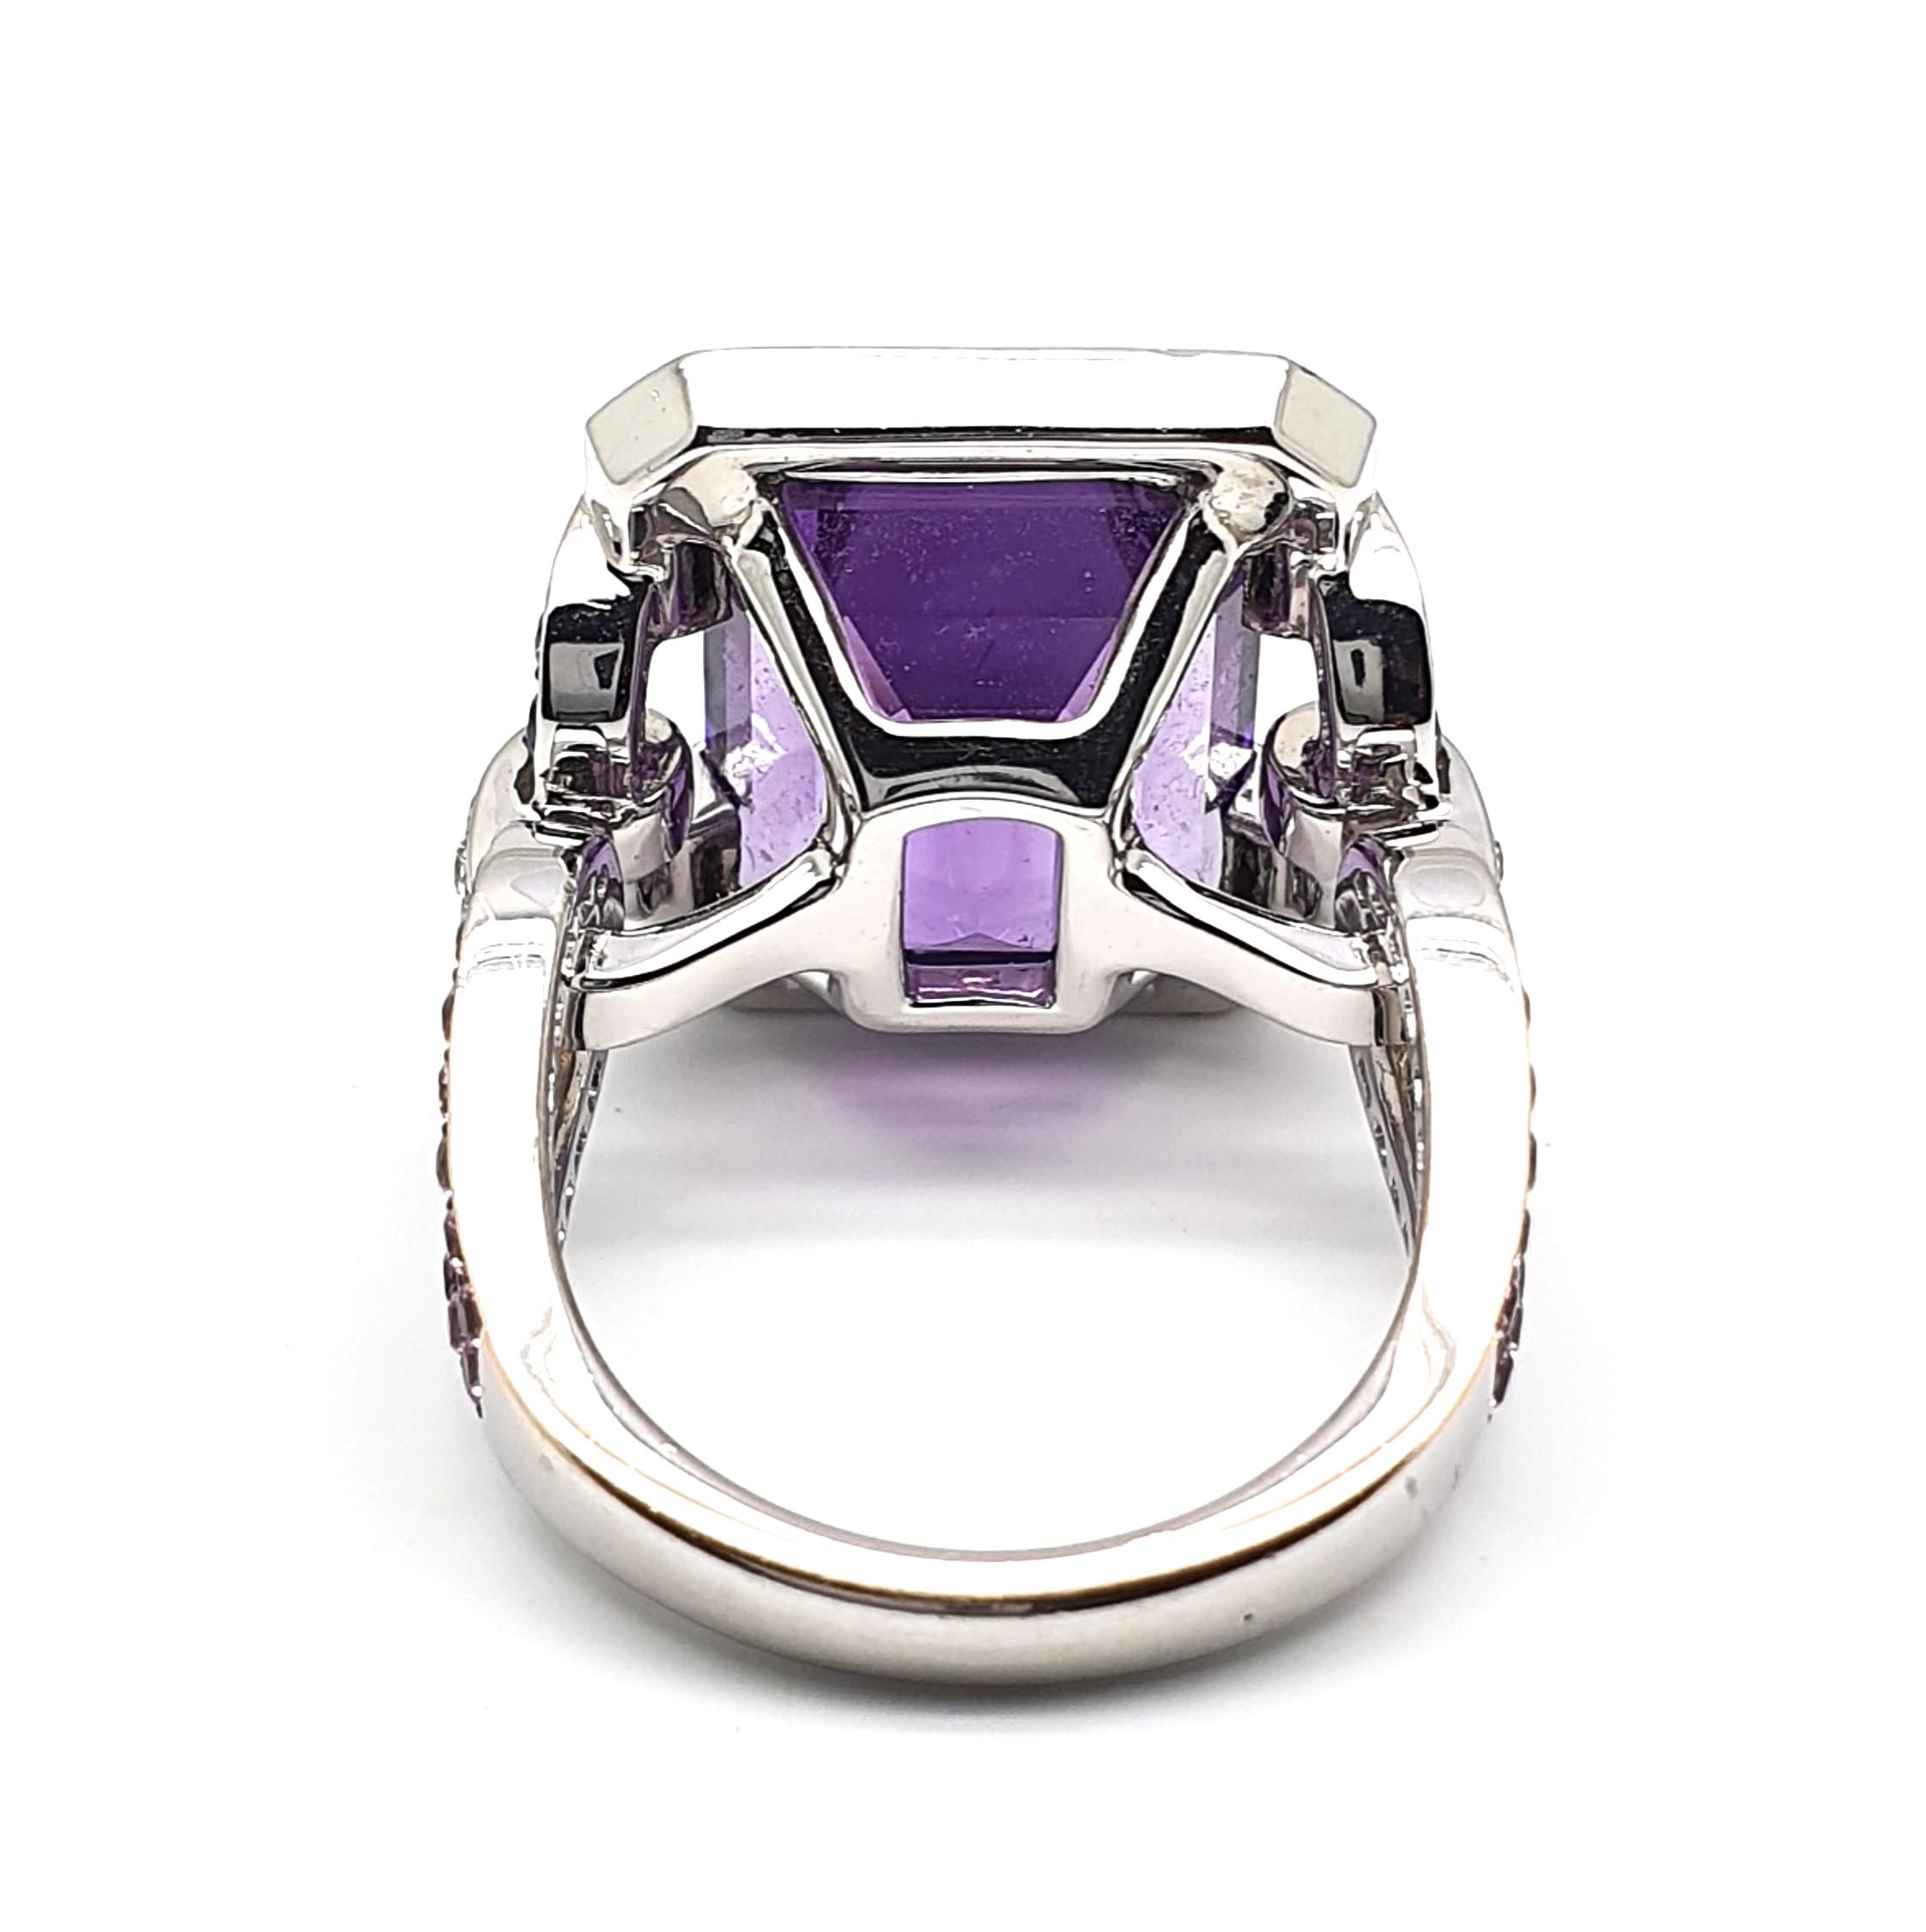 An eyecatching in colour splendid matching 18Krt White Gold ring occupied with 12.18ct an 8-angled cut Amethyst entourage, lilac-blue Corunds, 1.12ct, and 0.28ct brilliantly cut diamonds, colour W and clarity VVSi combined with pink Corunds